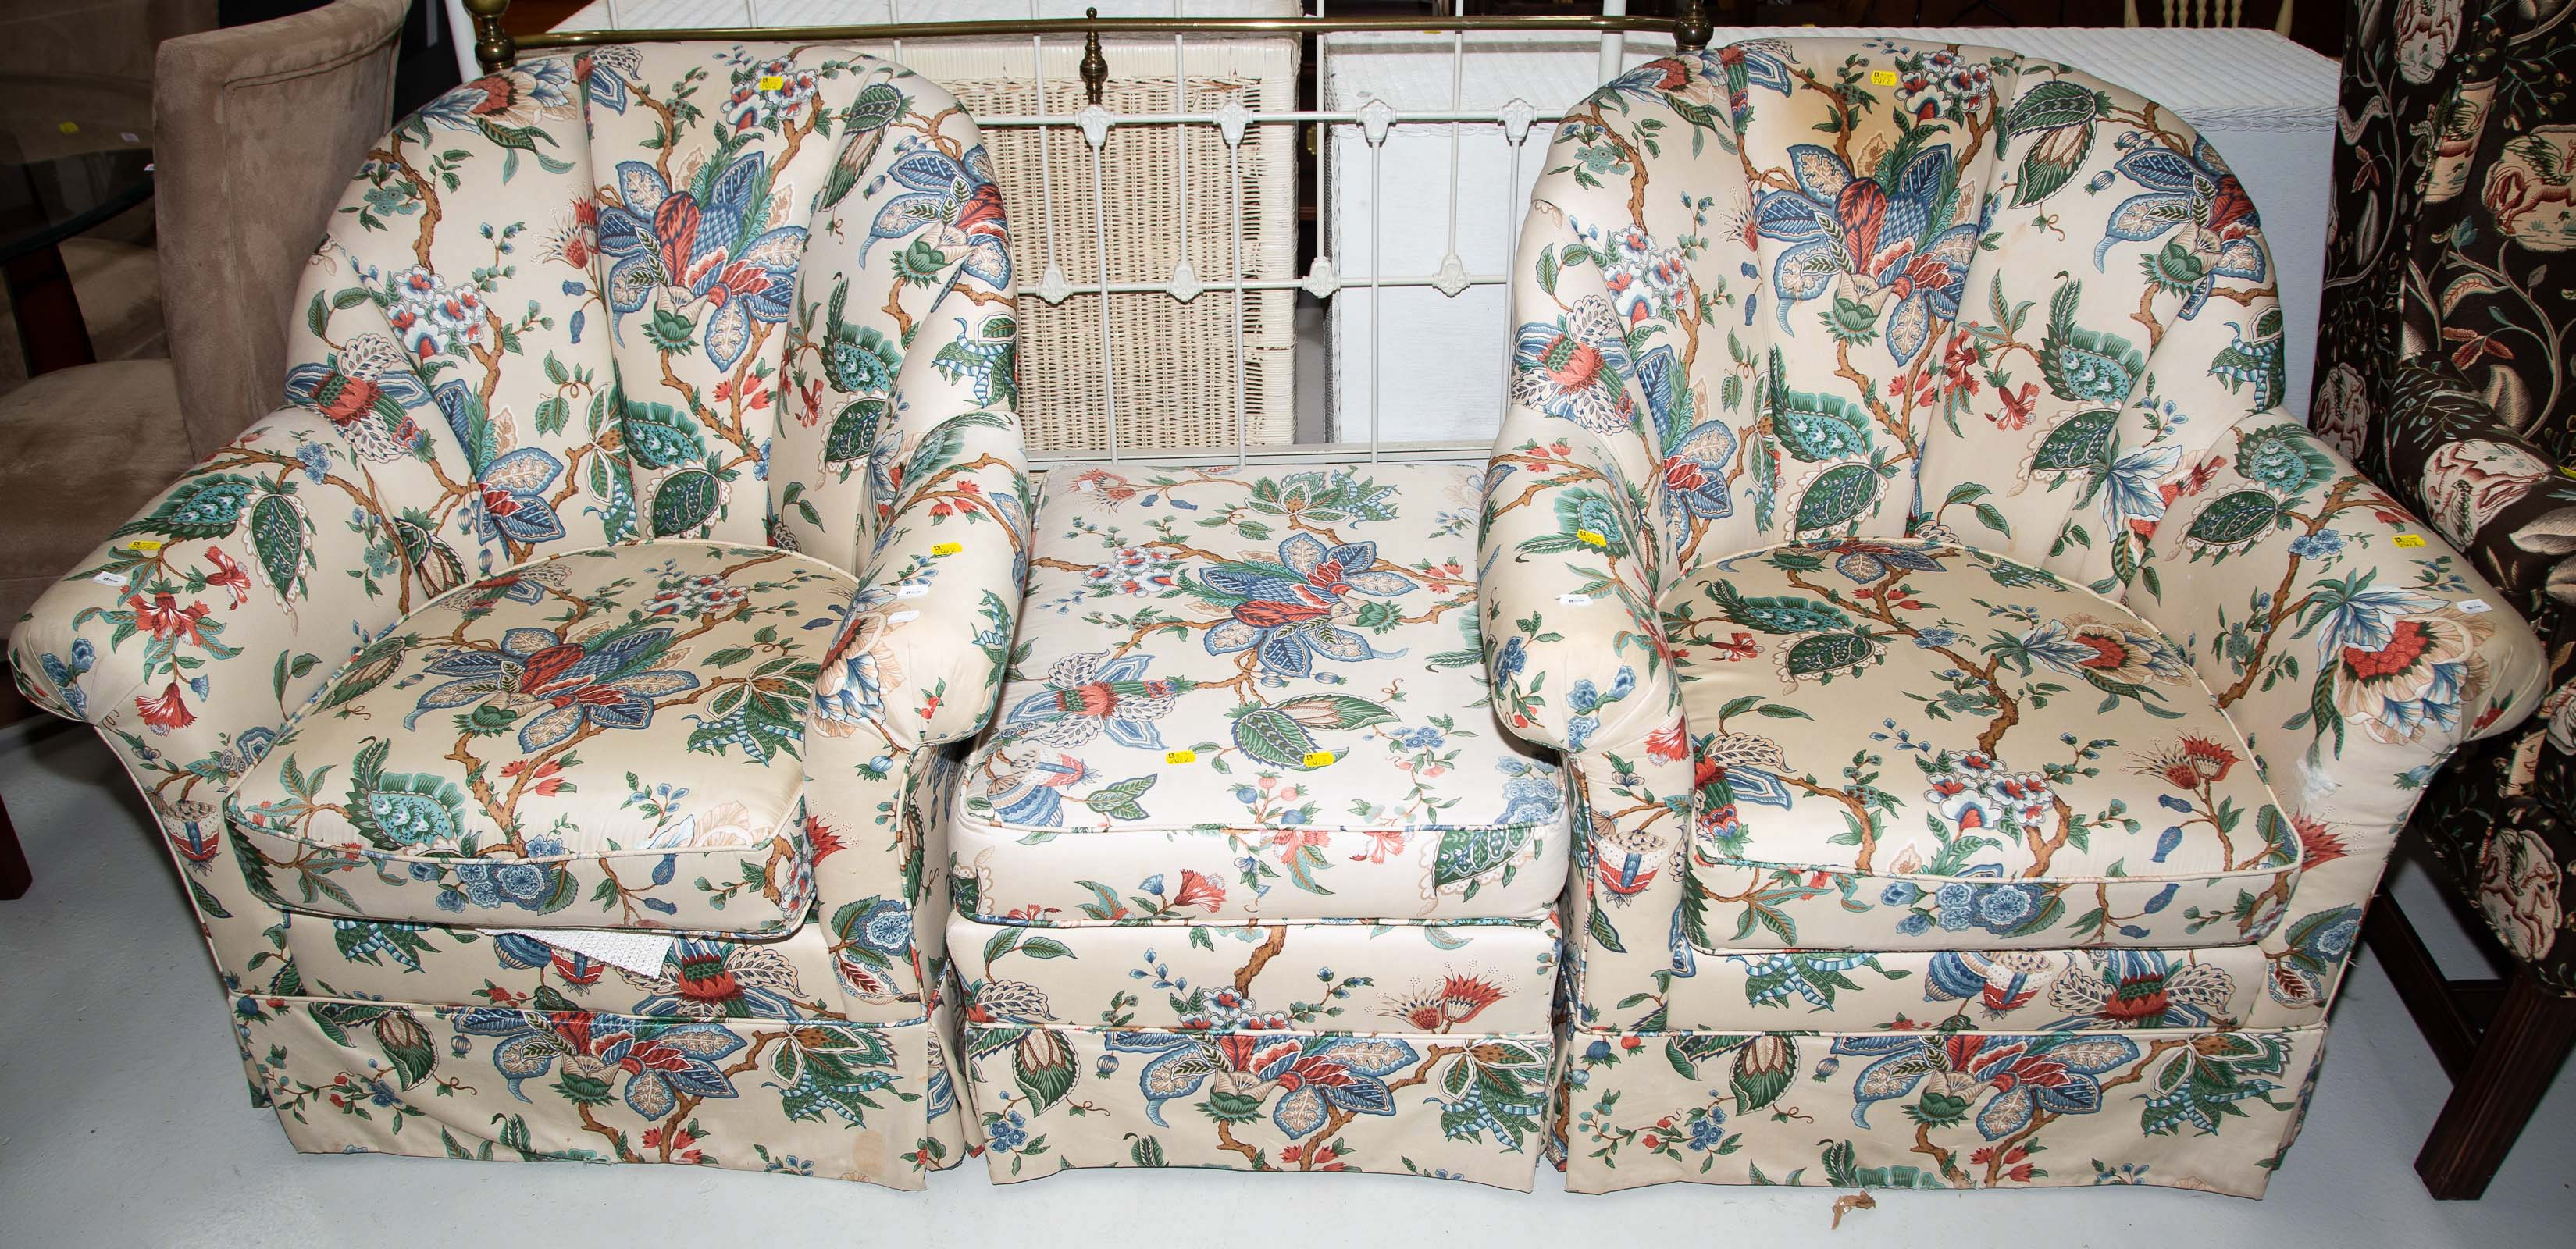 A PAIR OF BARREL BACK ARM CHAIRS 337c0f